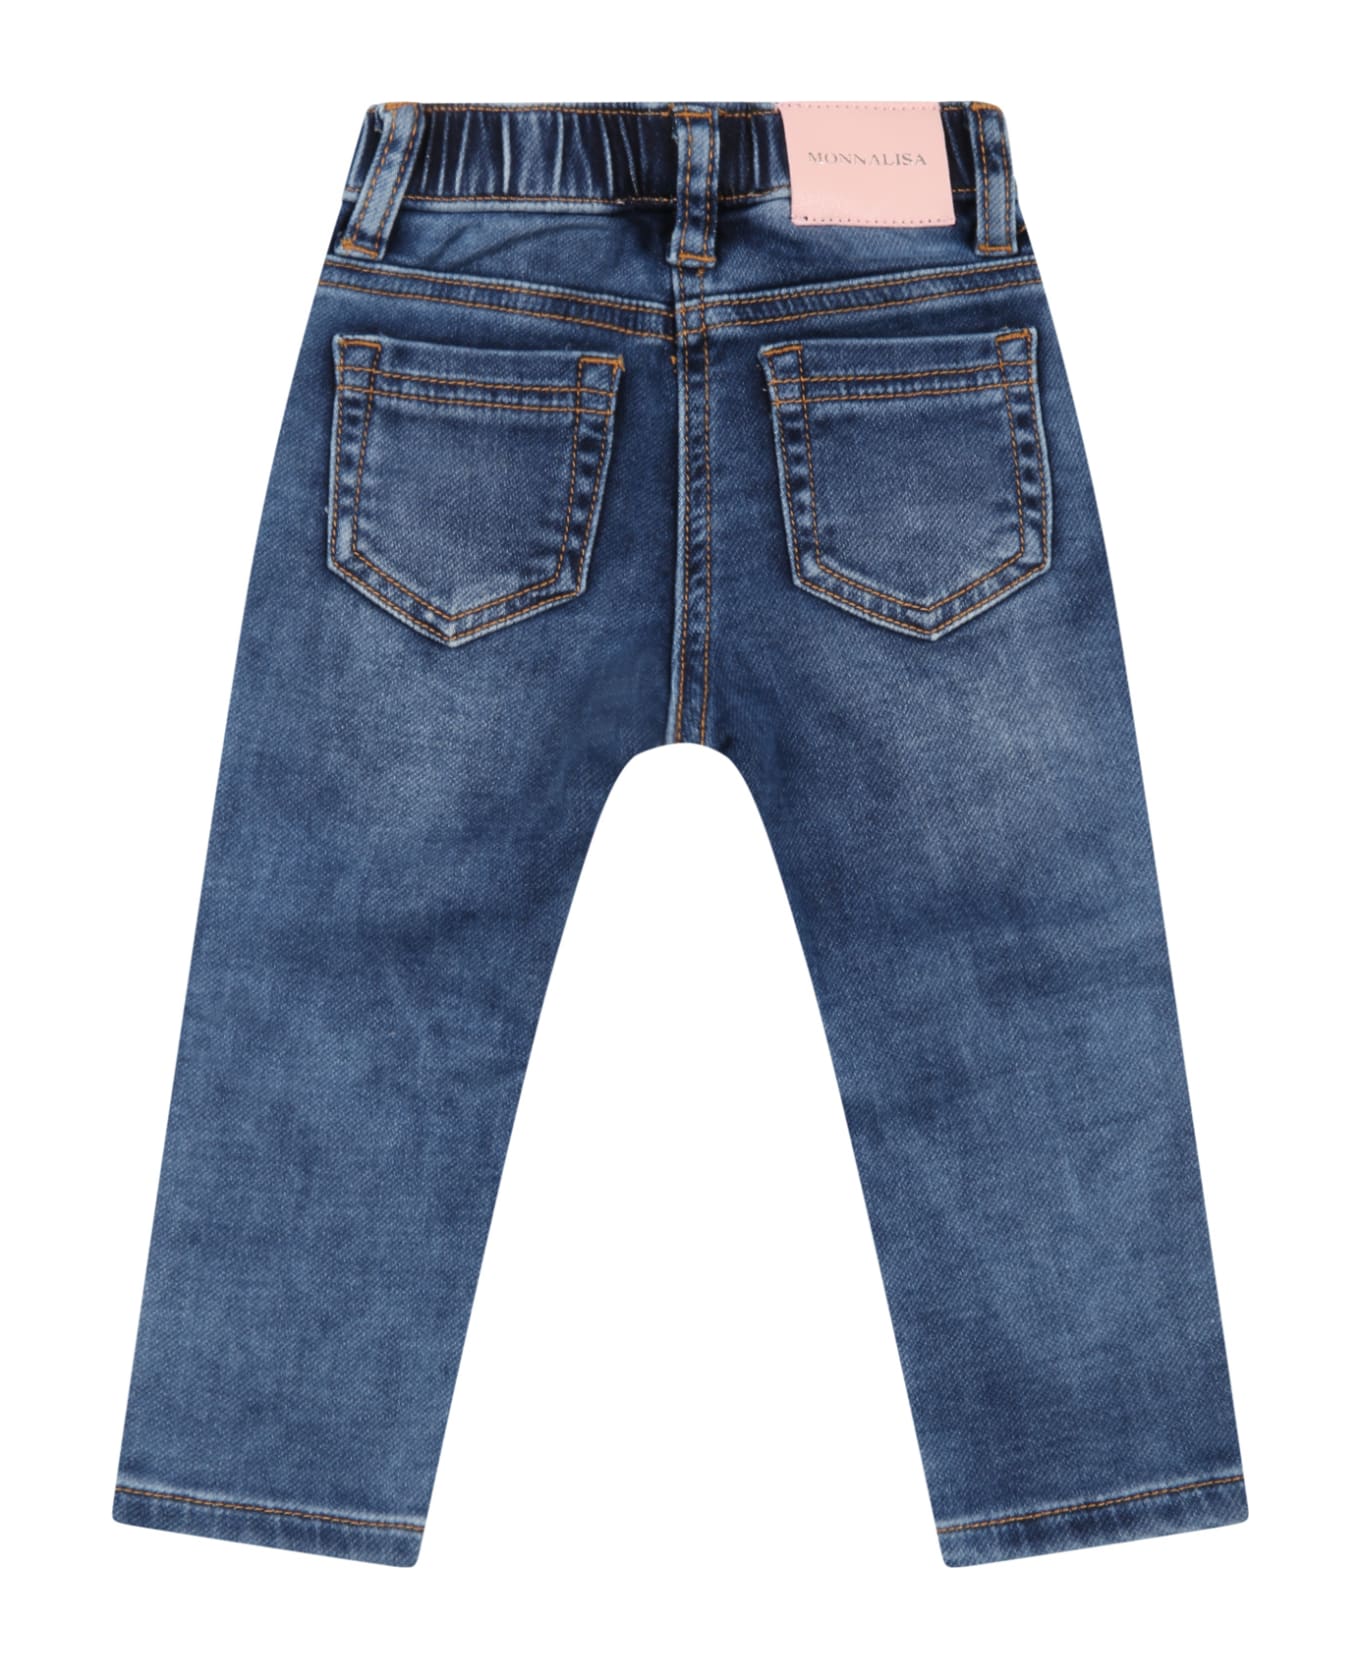 Monnalisa Blue Jeans For Baby Girl With Aristocats - Denim